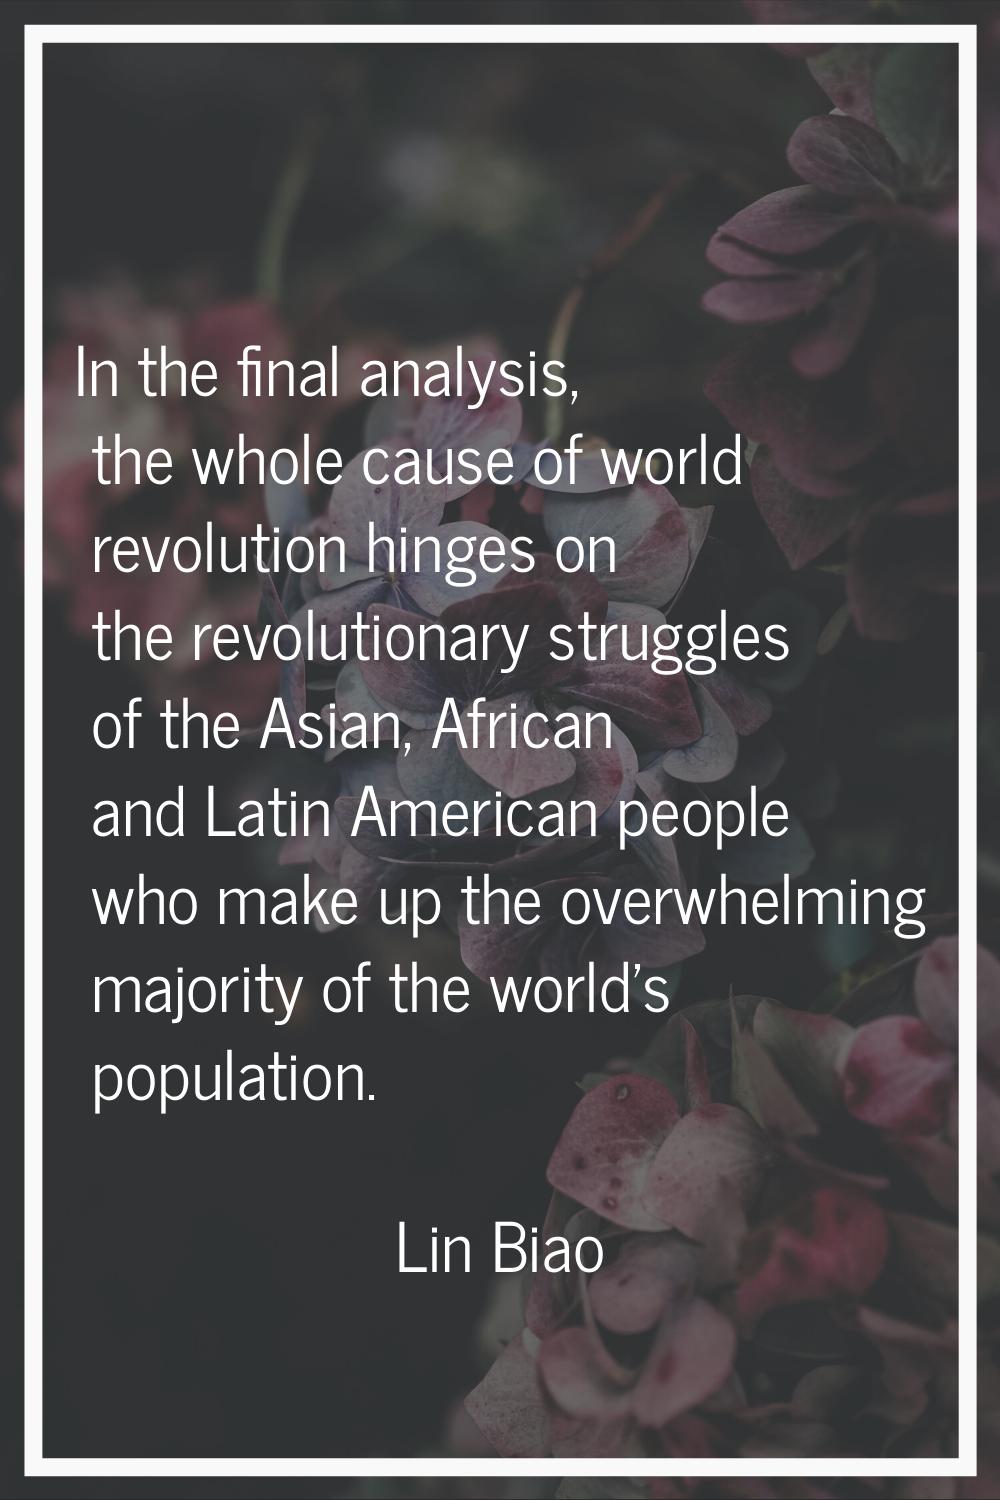 In the final analysis, the whole cause of world revolution hinges on the revolutionary struggles of